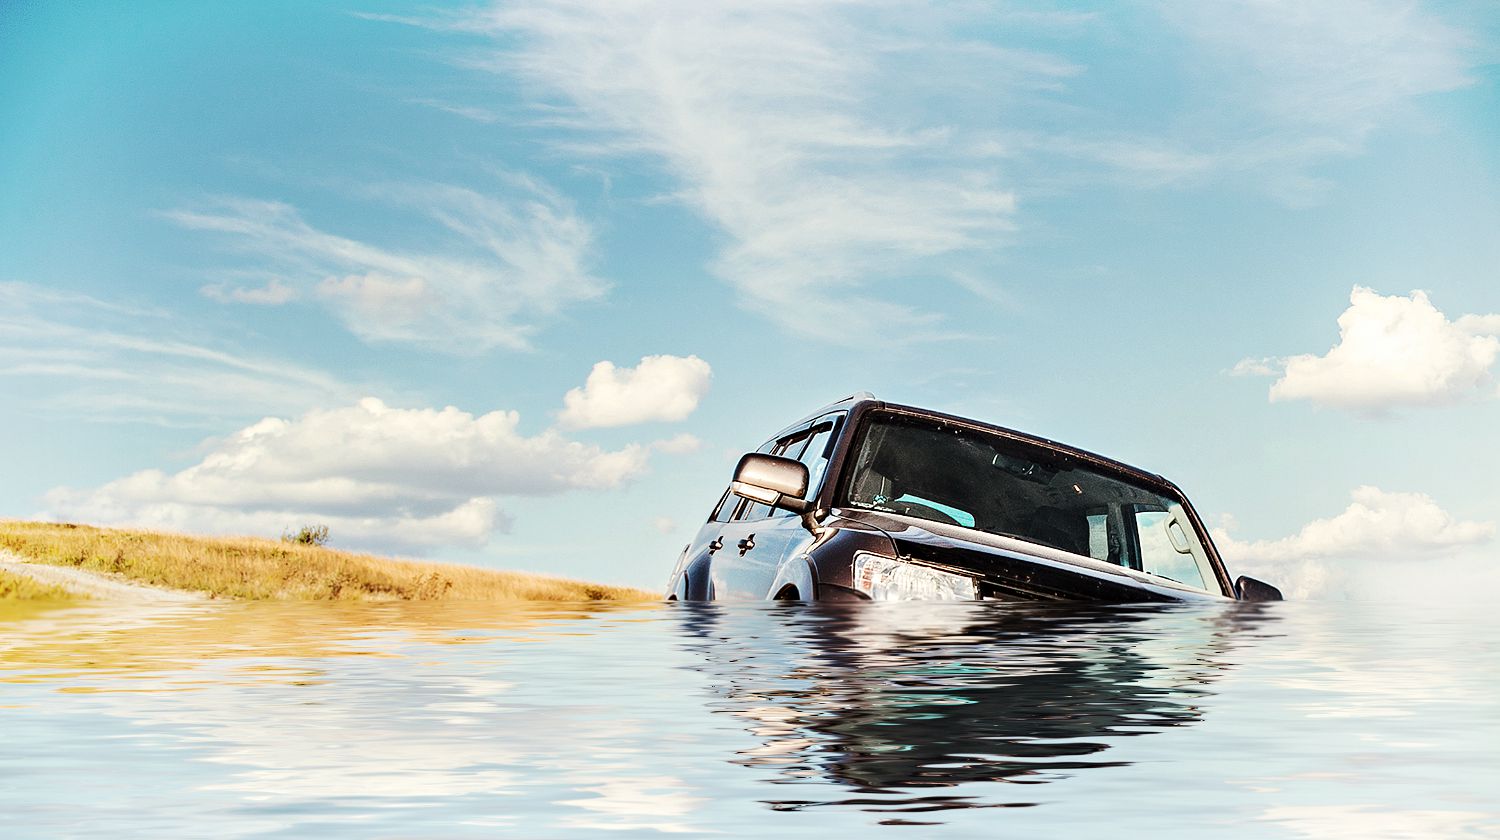 Feature | S.U.V. crossing of the river | Escape a Sinking Car: What To Do When You're Submerged